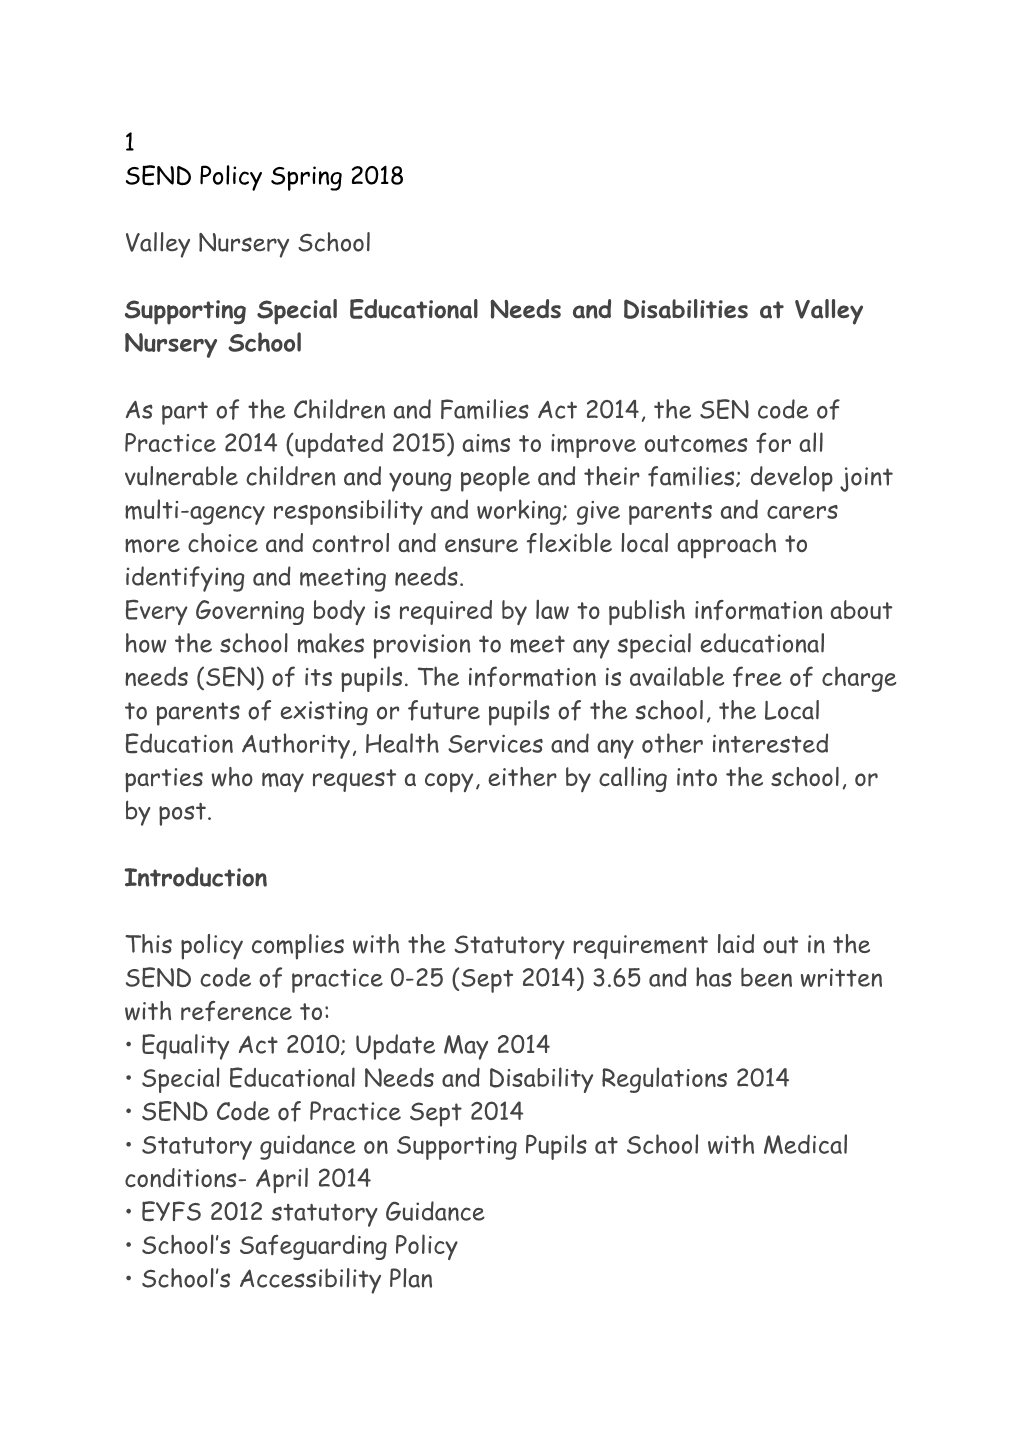 Supporting Special Educational Needs and Disabilities at Valley Nursery School